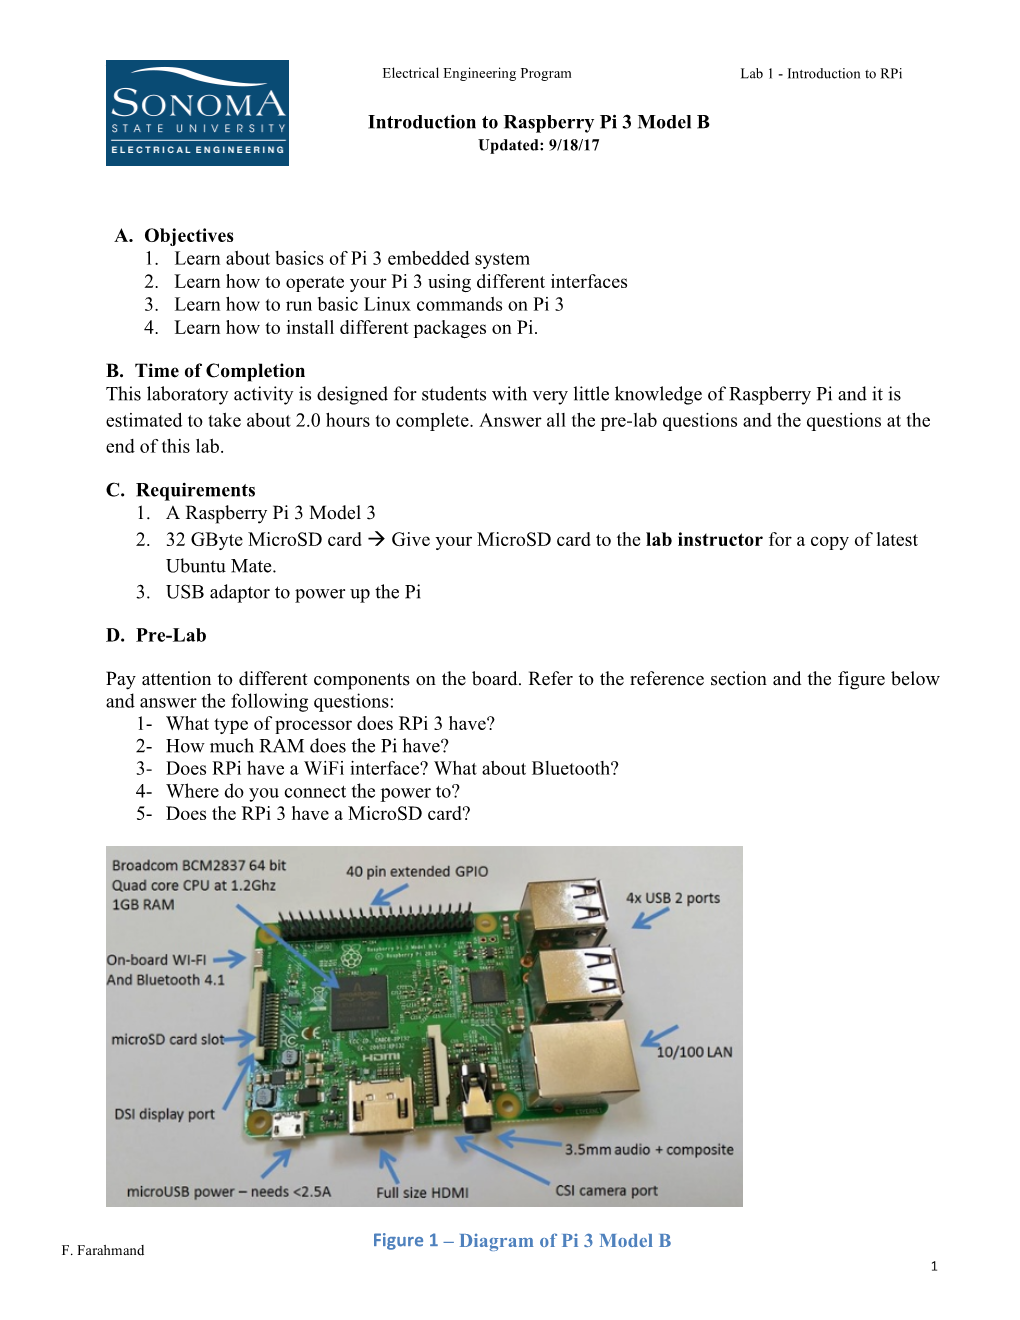 Introduction to Raspberry Pi 3 Model B Updated: 9/18/17